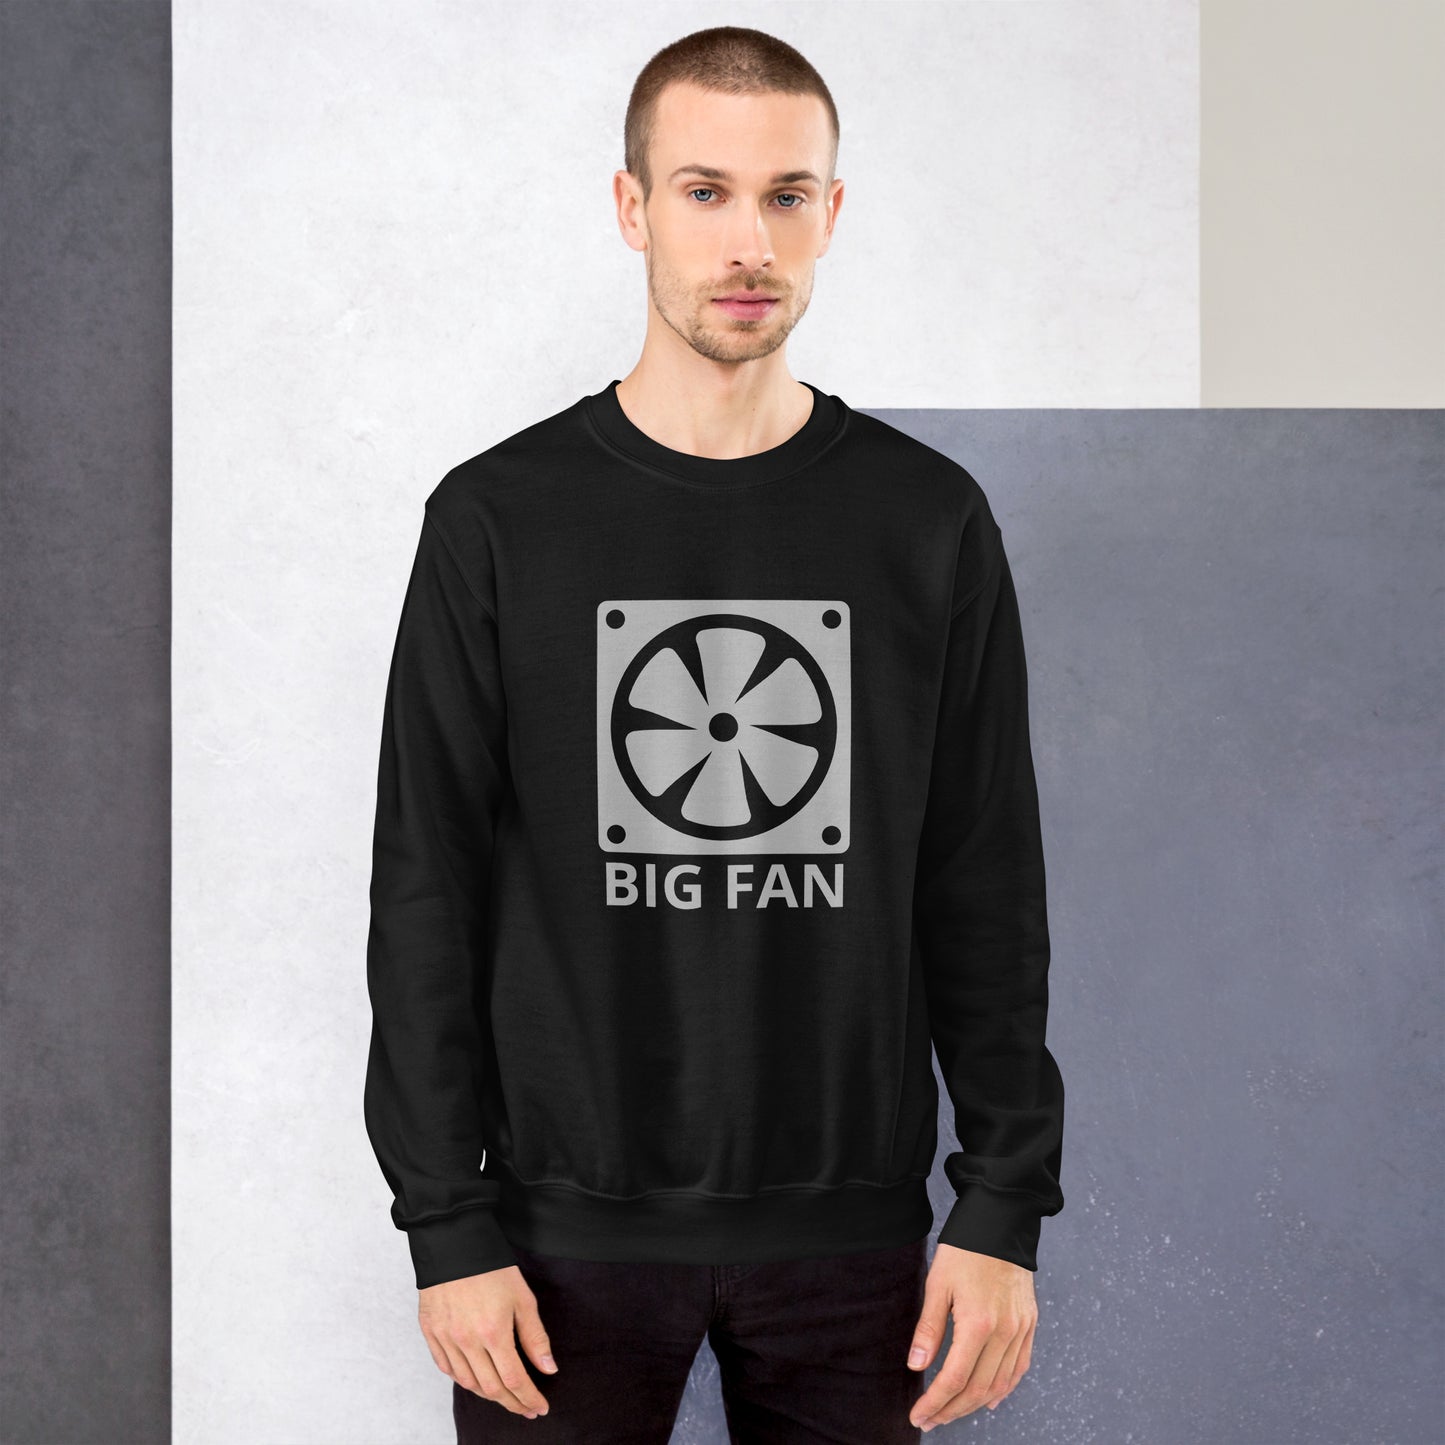 Men with black sweatshirt with image of a big computer fan and the text "BIG FAN"